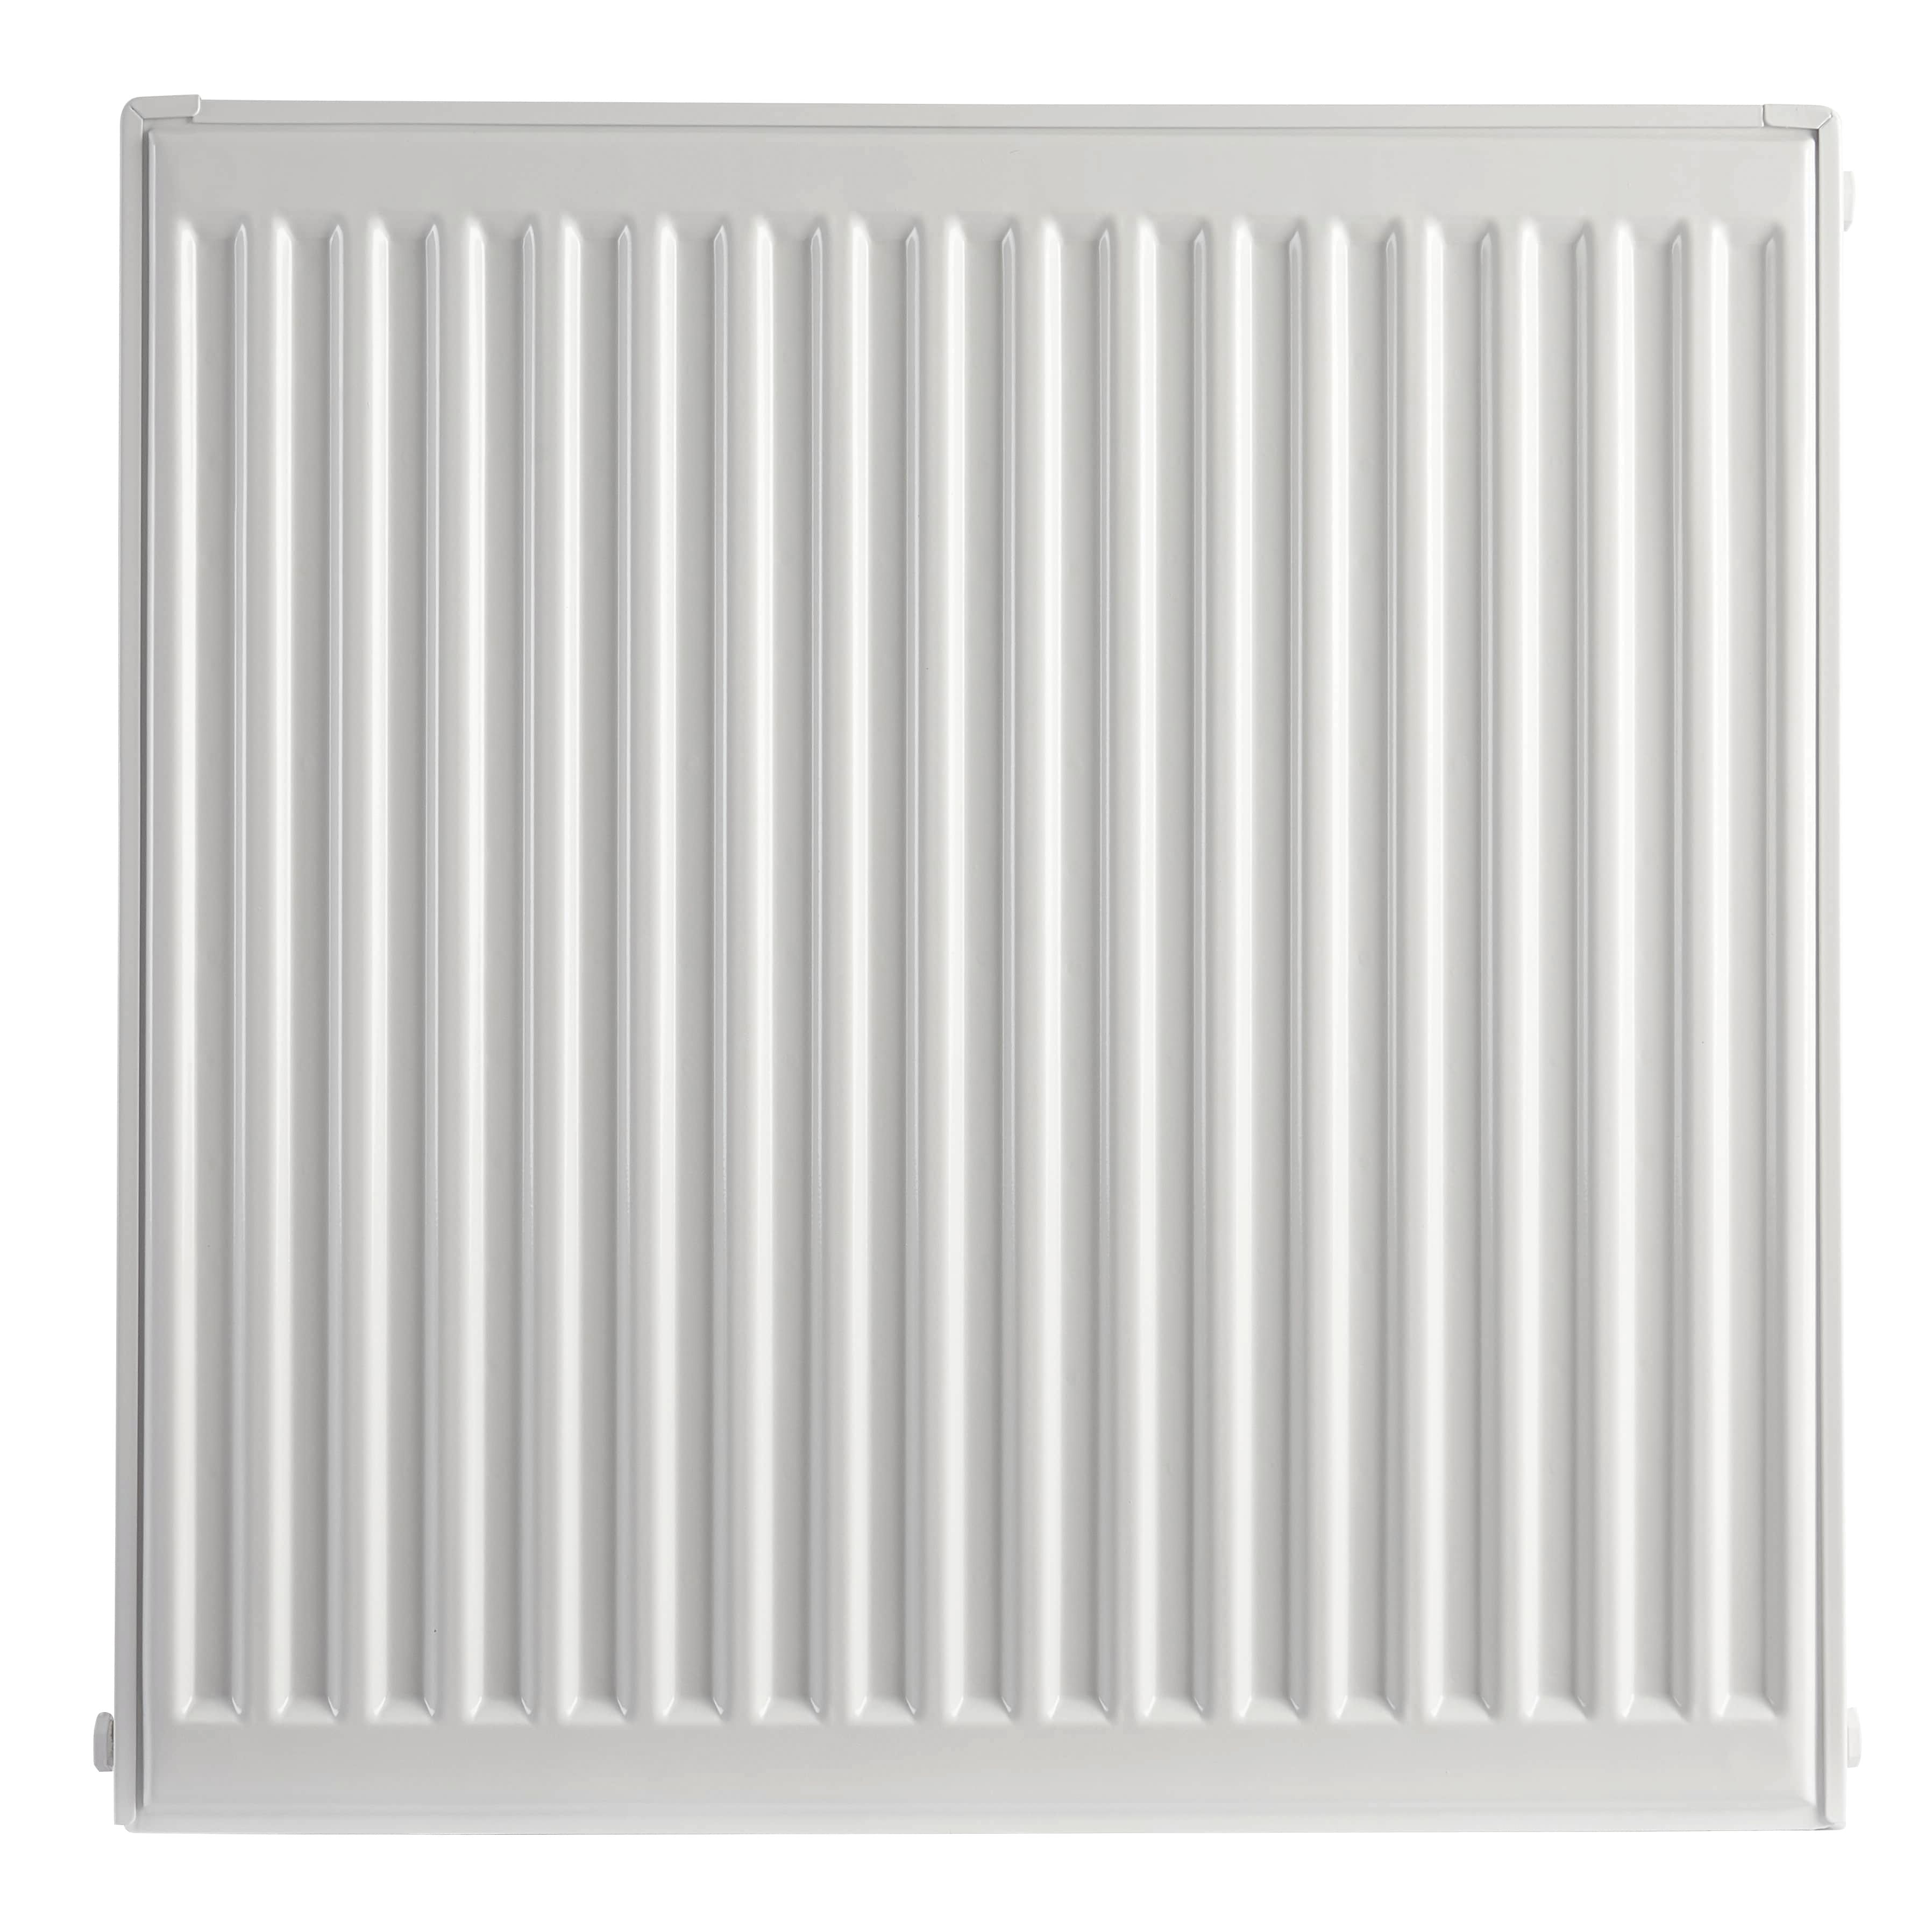 Image of Homeline by Stelrad 700 x 700mm Type 21 Double Panel Plus Single Convector Radiator